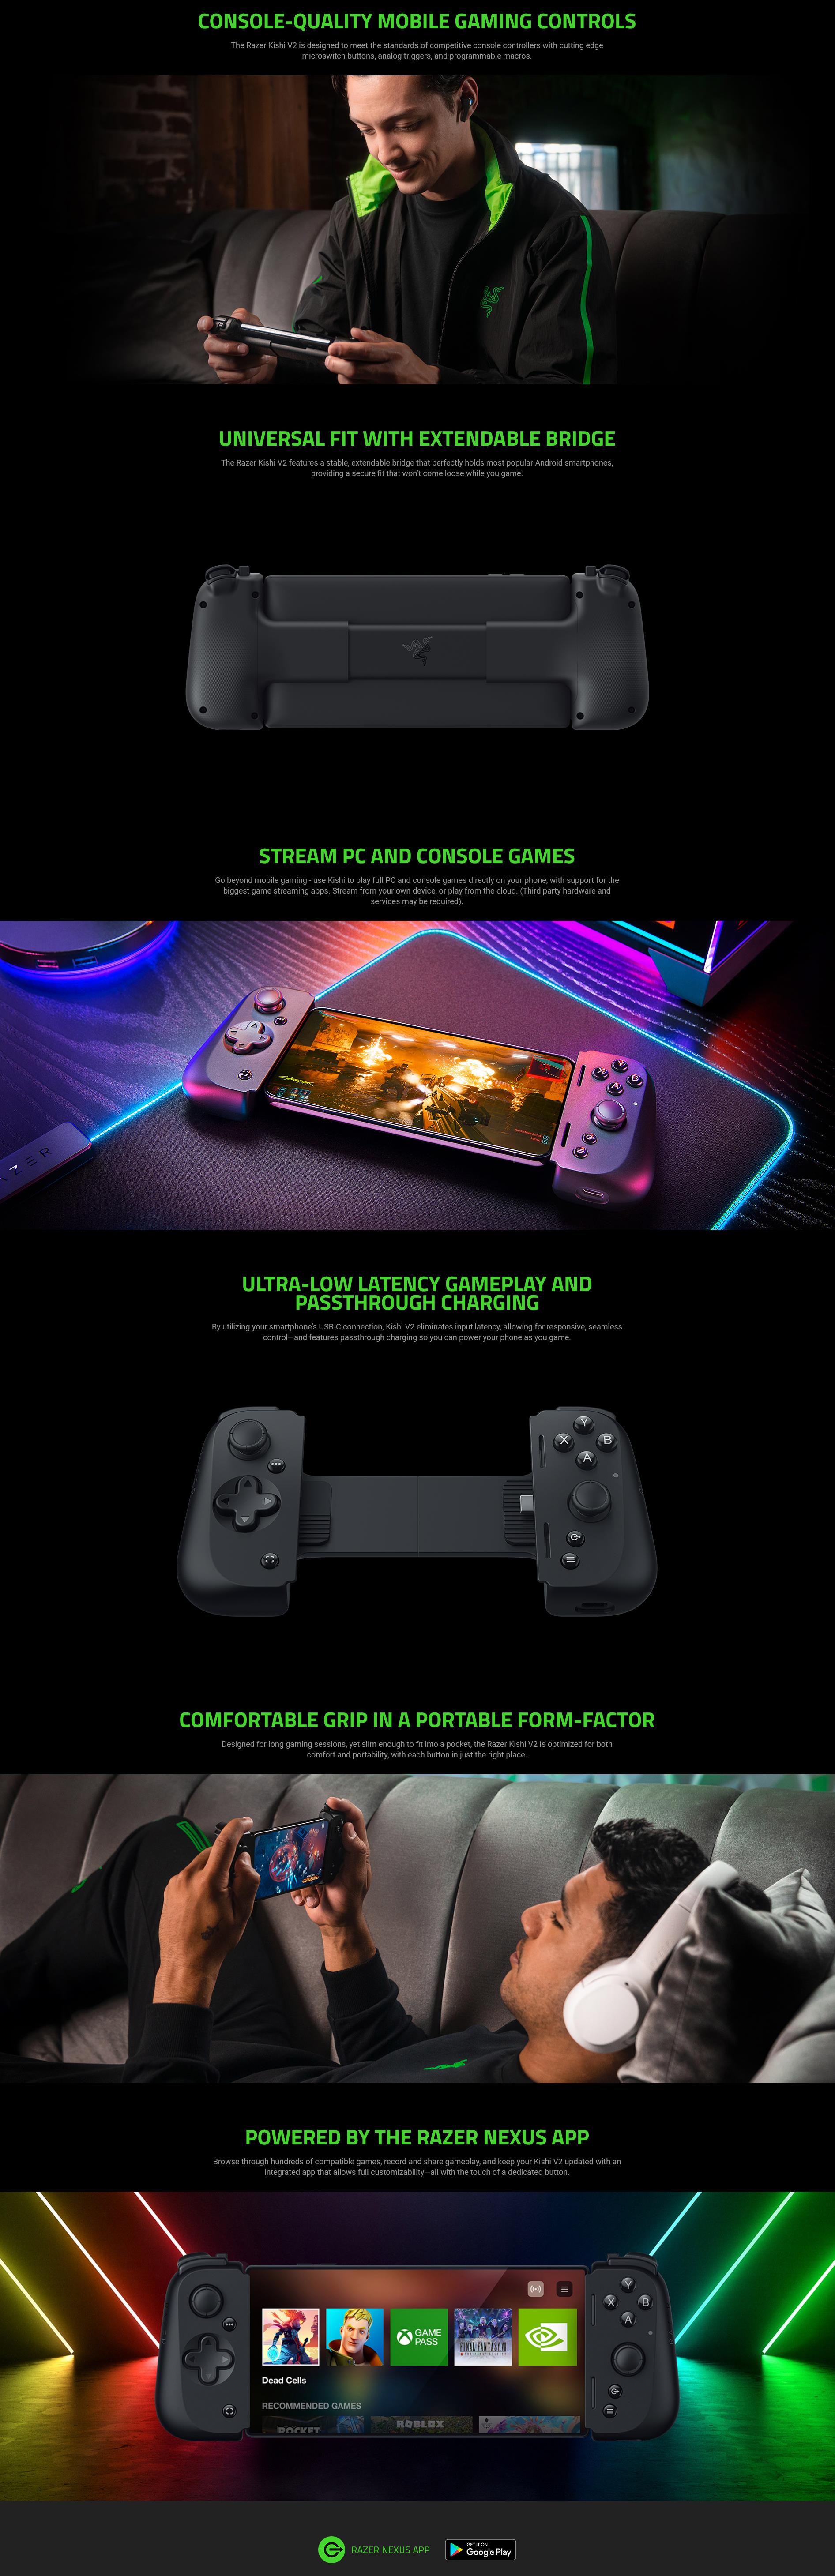 A large marketing image providing additional information about the product Razer Kishi V2 - Gaming Controller for Android - Additional alt info not provided